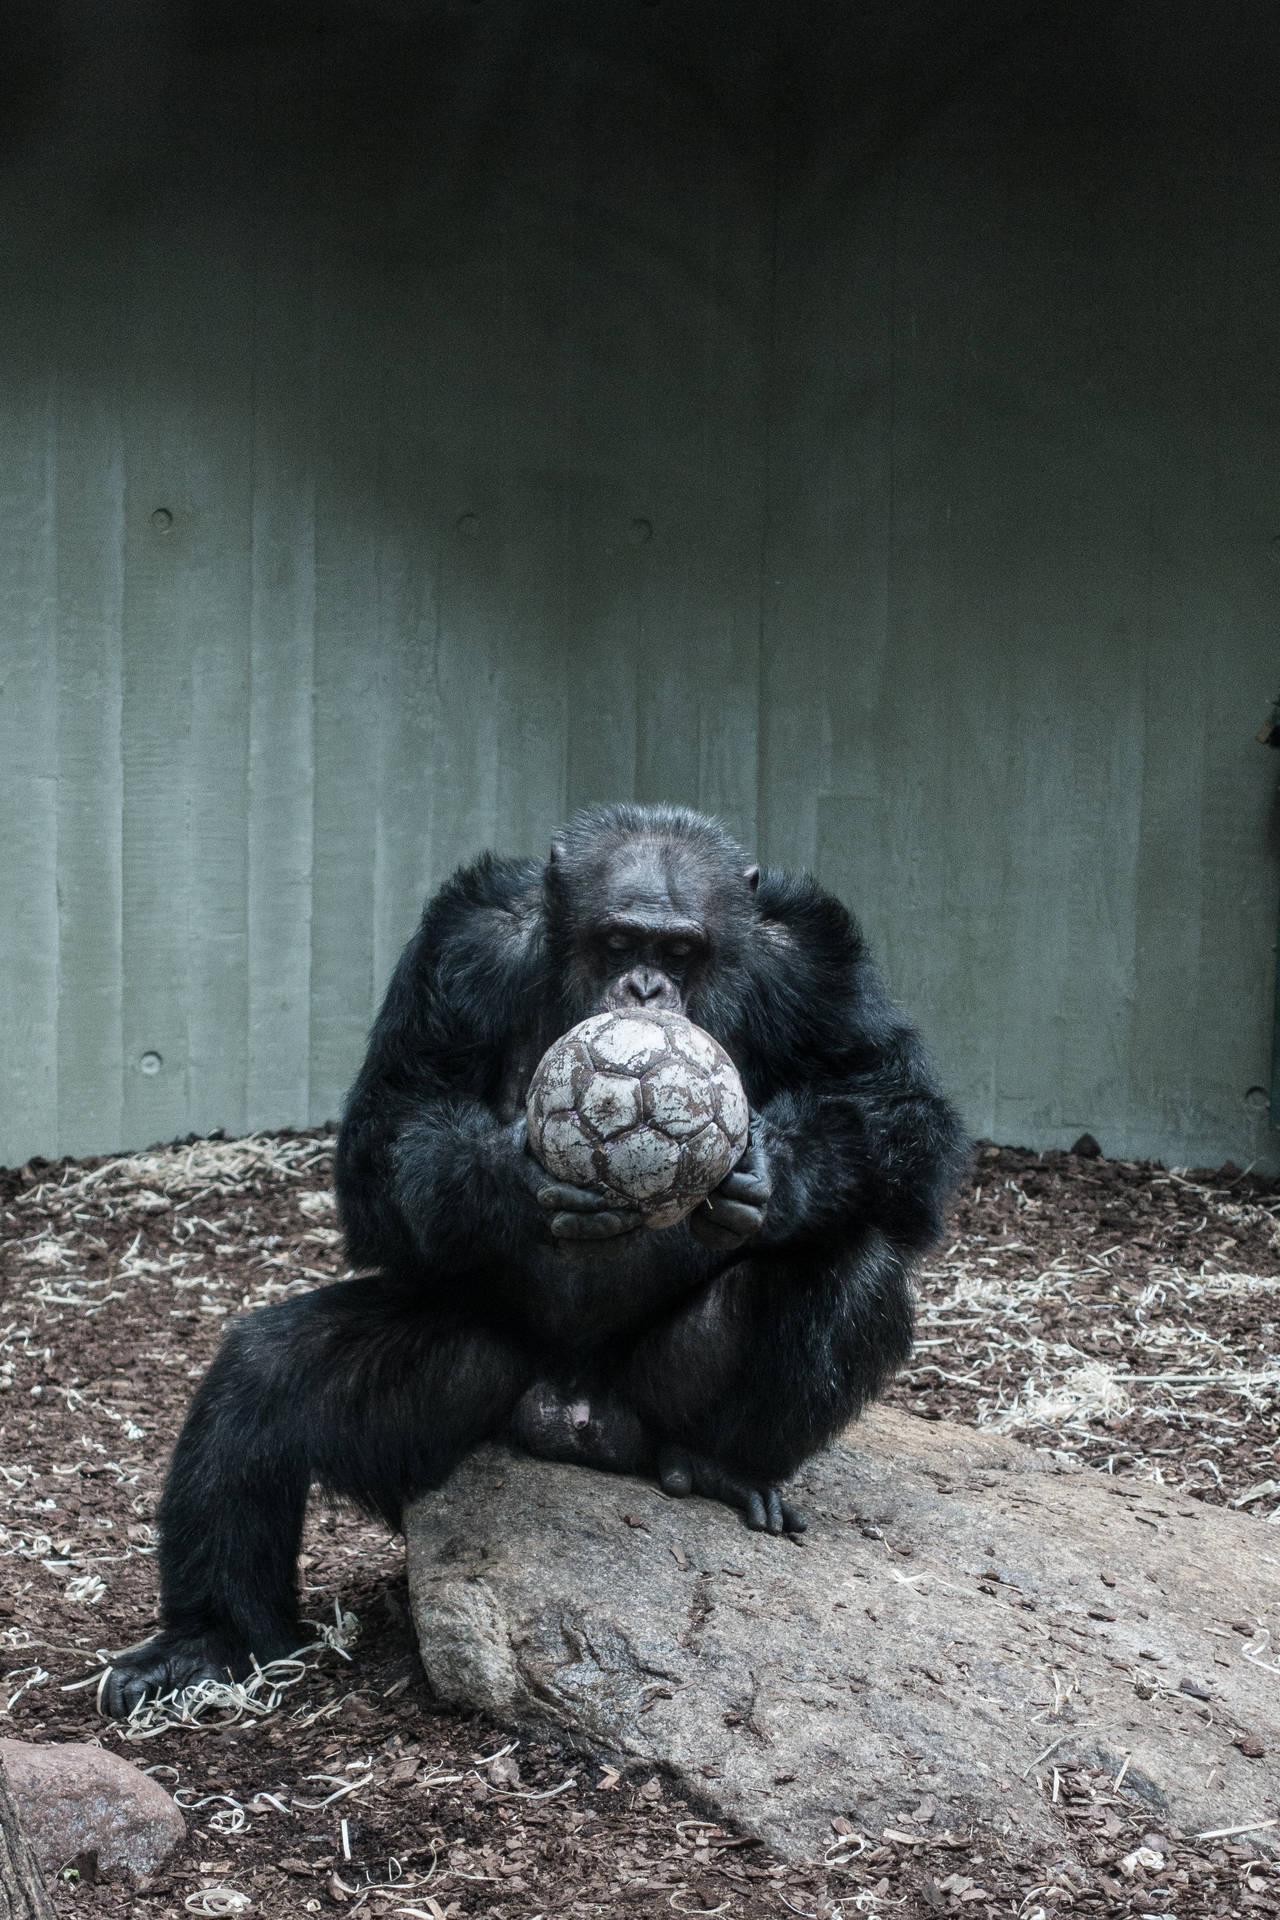 A Cool Gorilla Chilling on a Rock Wallpaper